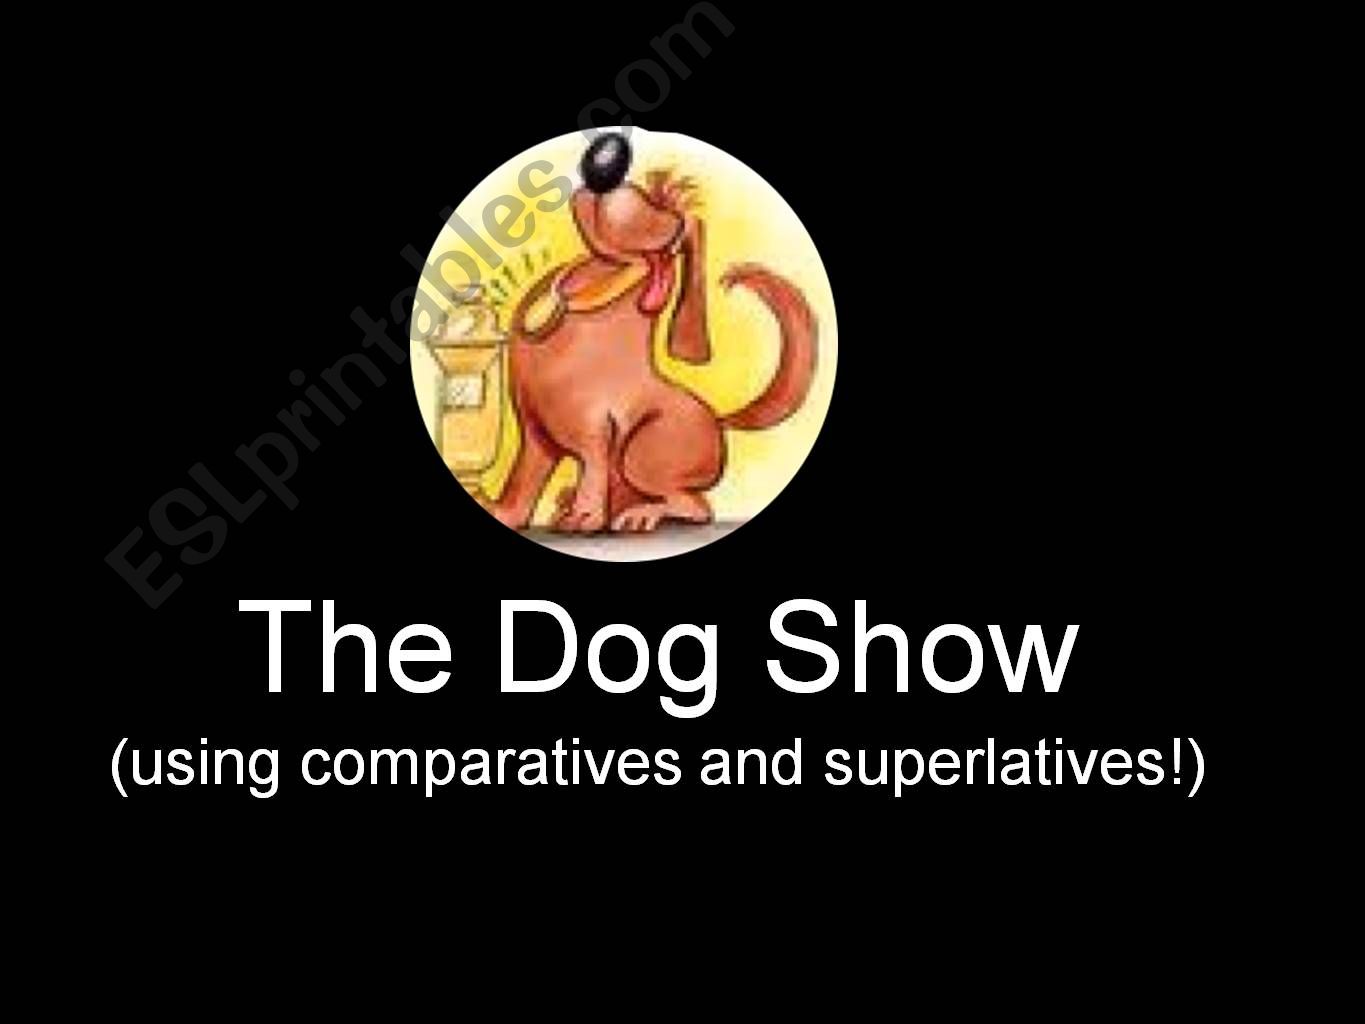 The Dog Show powerpoint